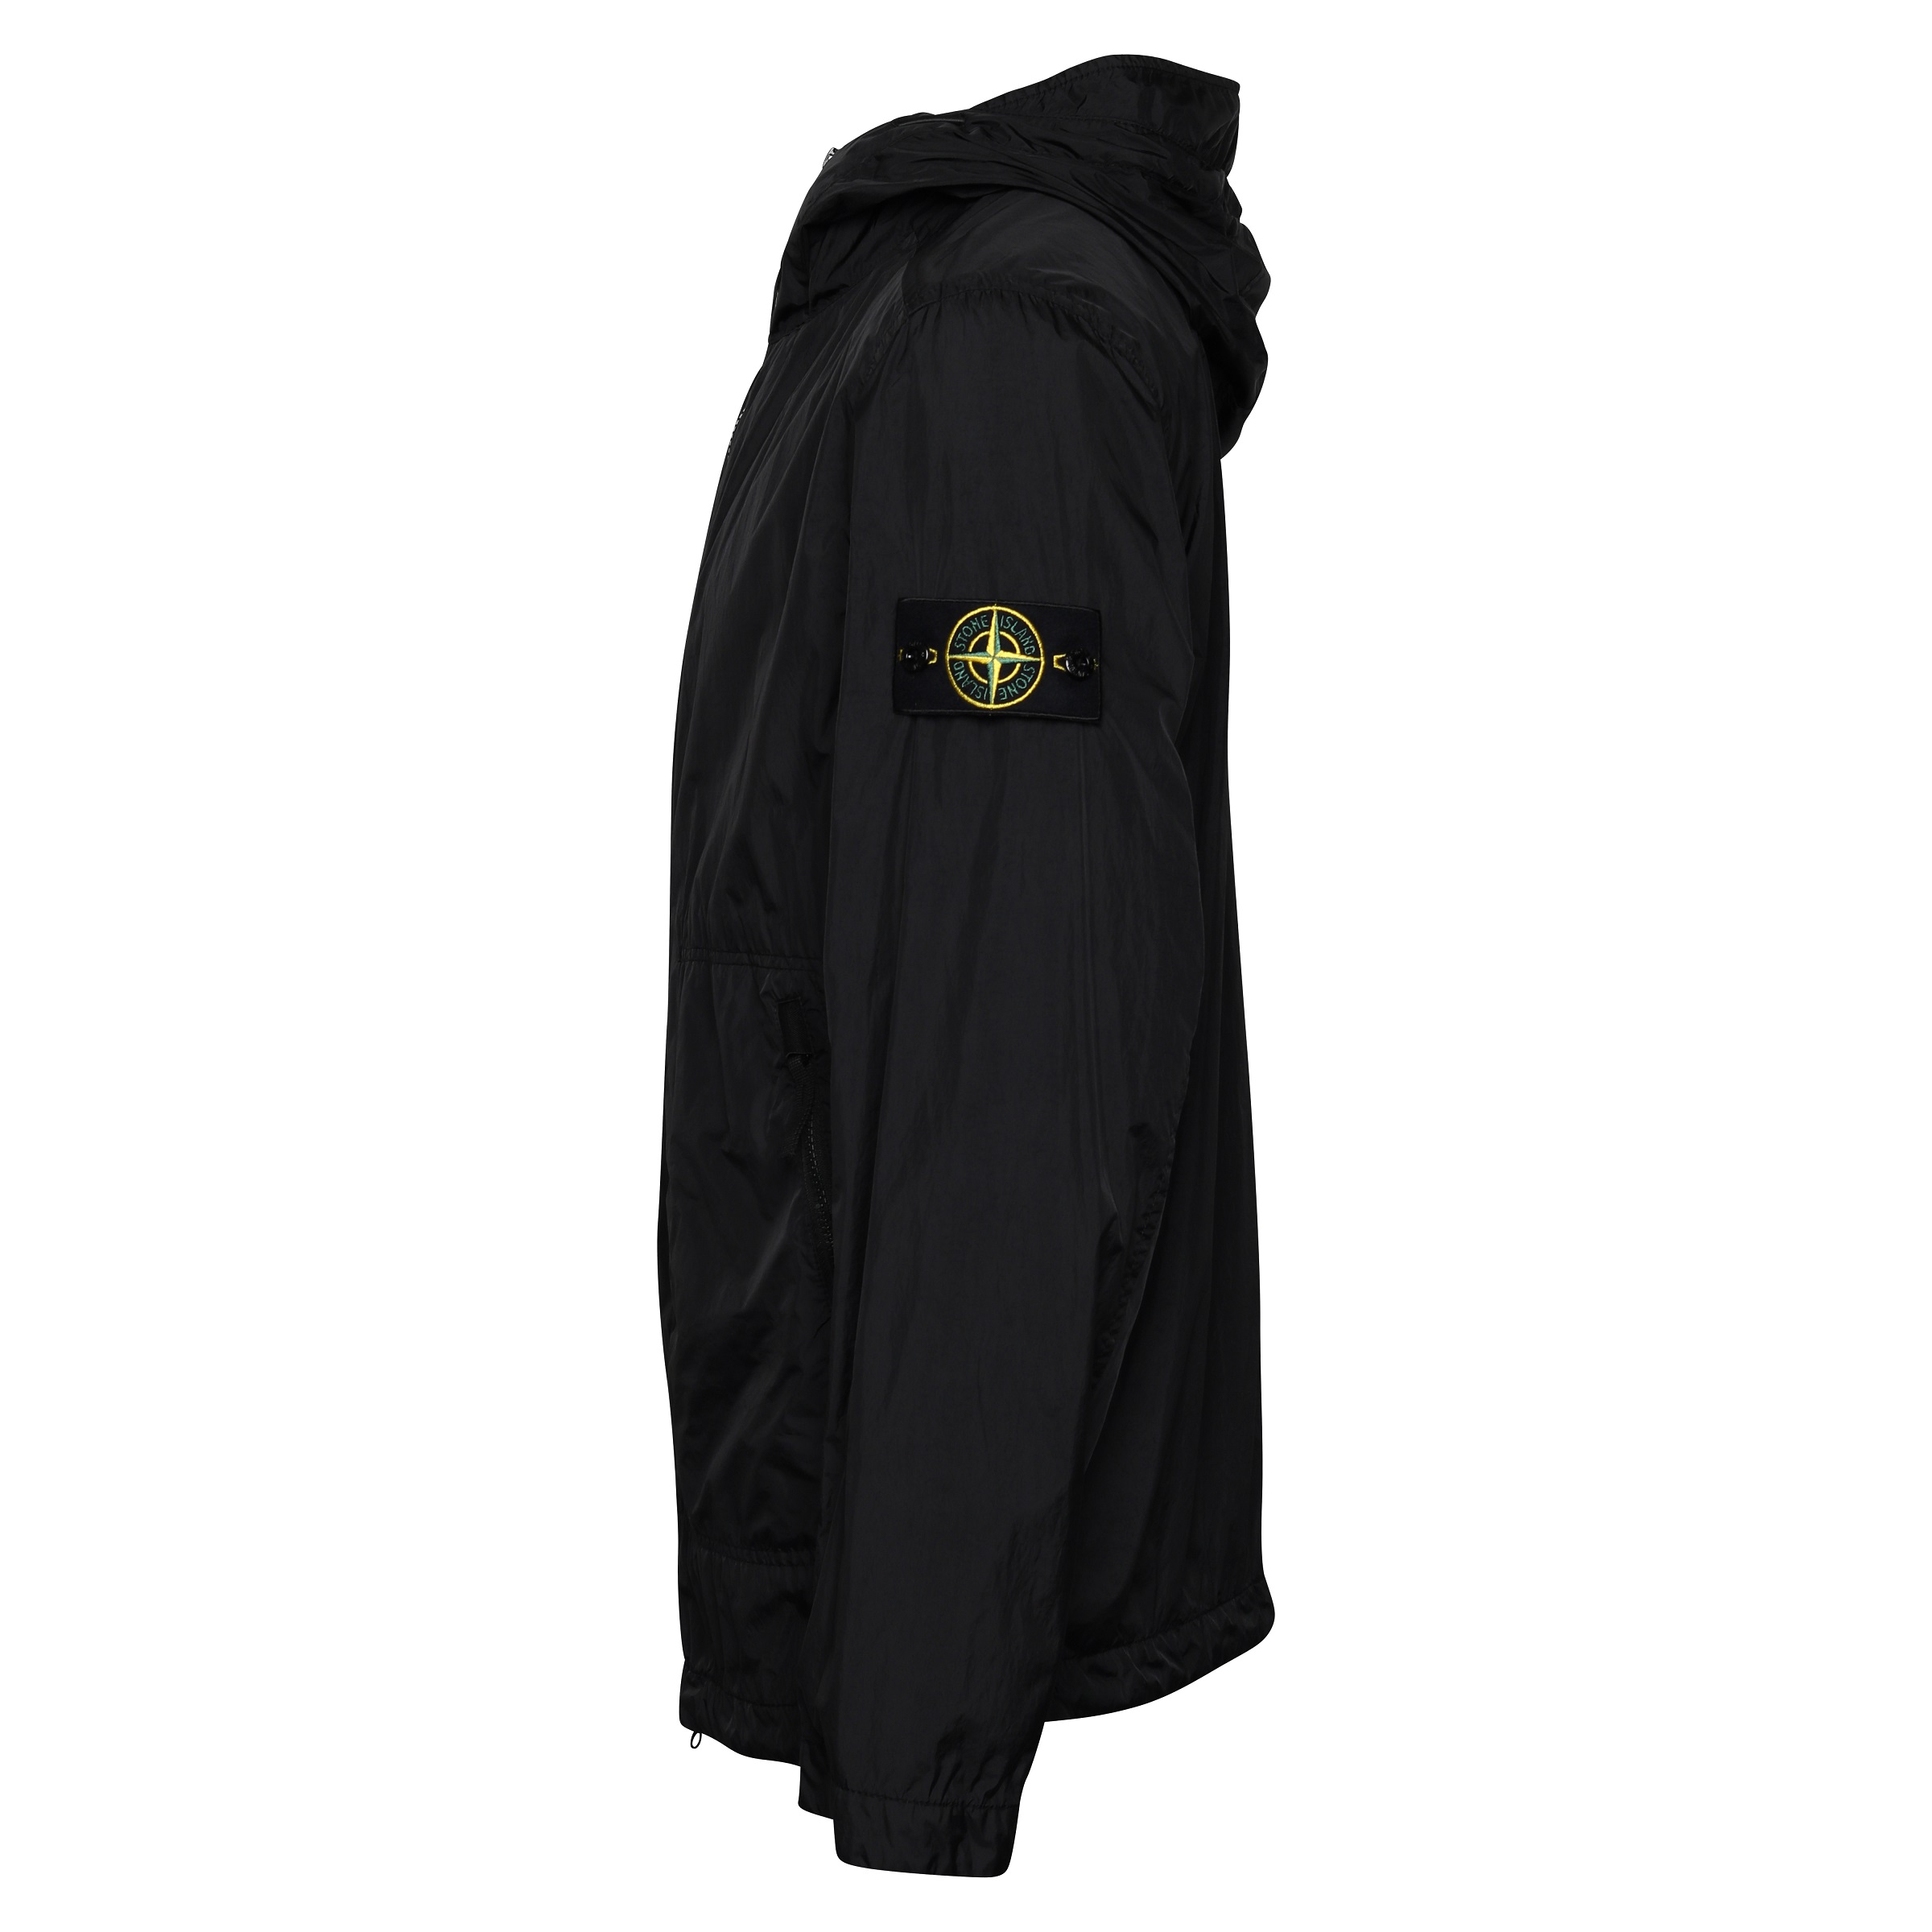 Stone Island Garment Dyed Crinkle Reps Hooded Light Jacket in Black XL